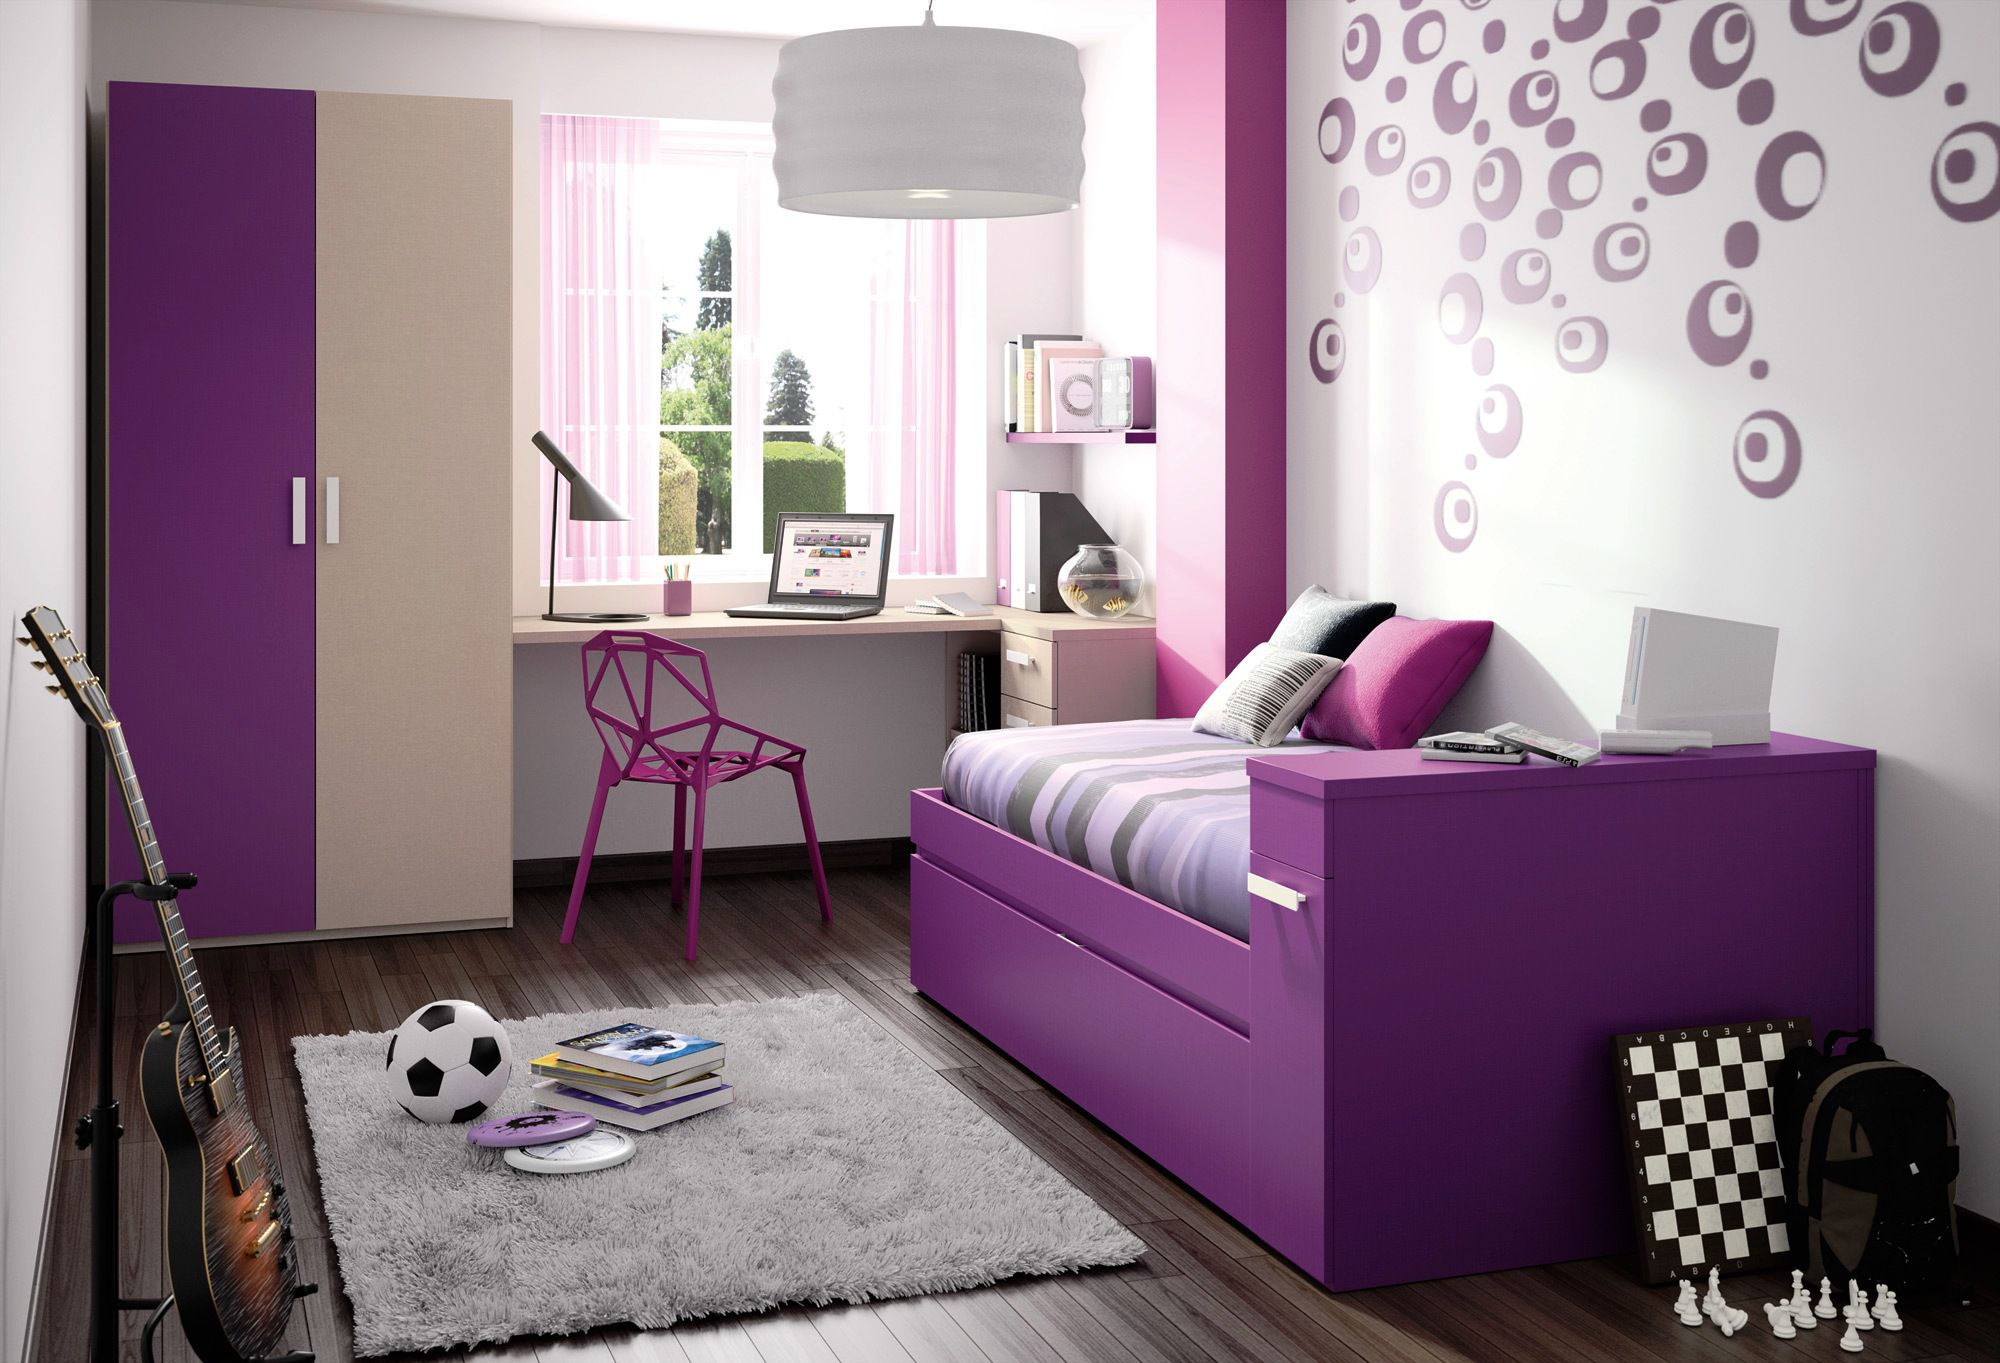 Purple Bed Inside Comfy Purple Bed And Chair Inside Cool Teen Bedrooms With Unusual Wall Decal Bedroom Cool Teen Bedrooms Using Black And White Interior Theme